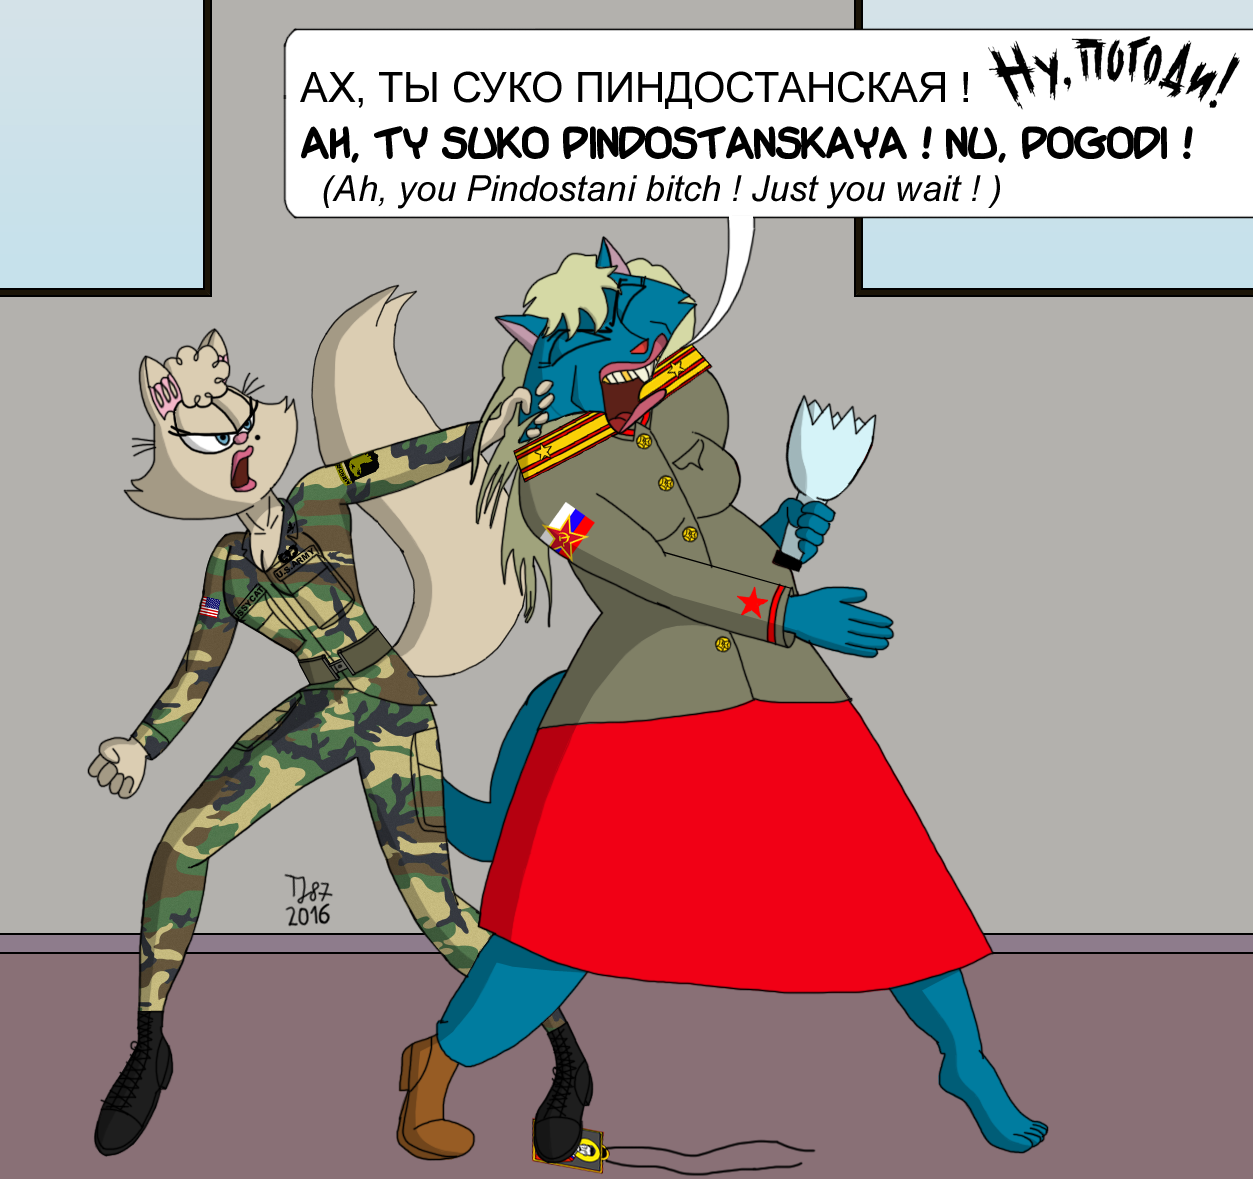 Catfight: Paratrooper against Chekist by TeeJay87